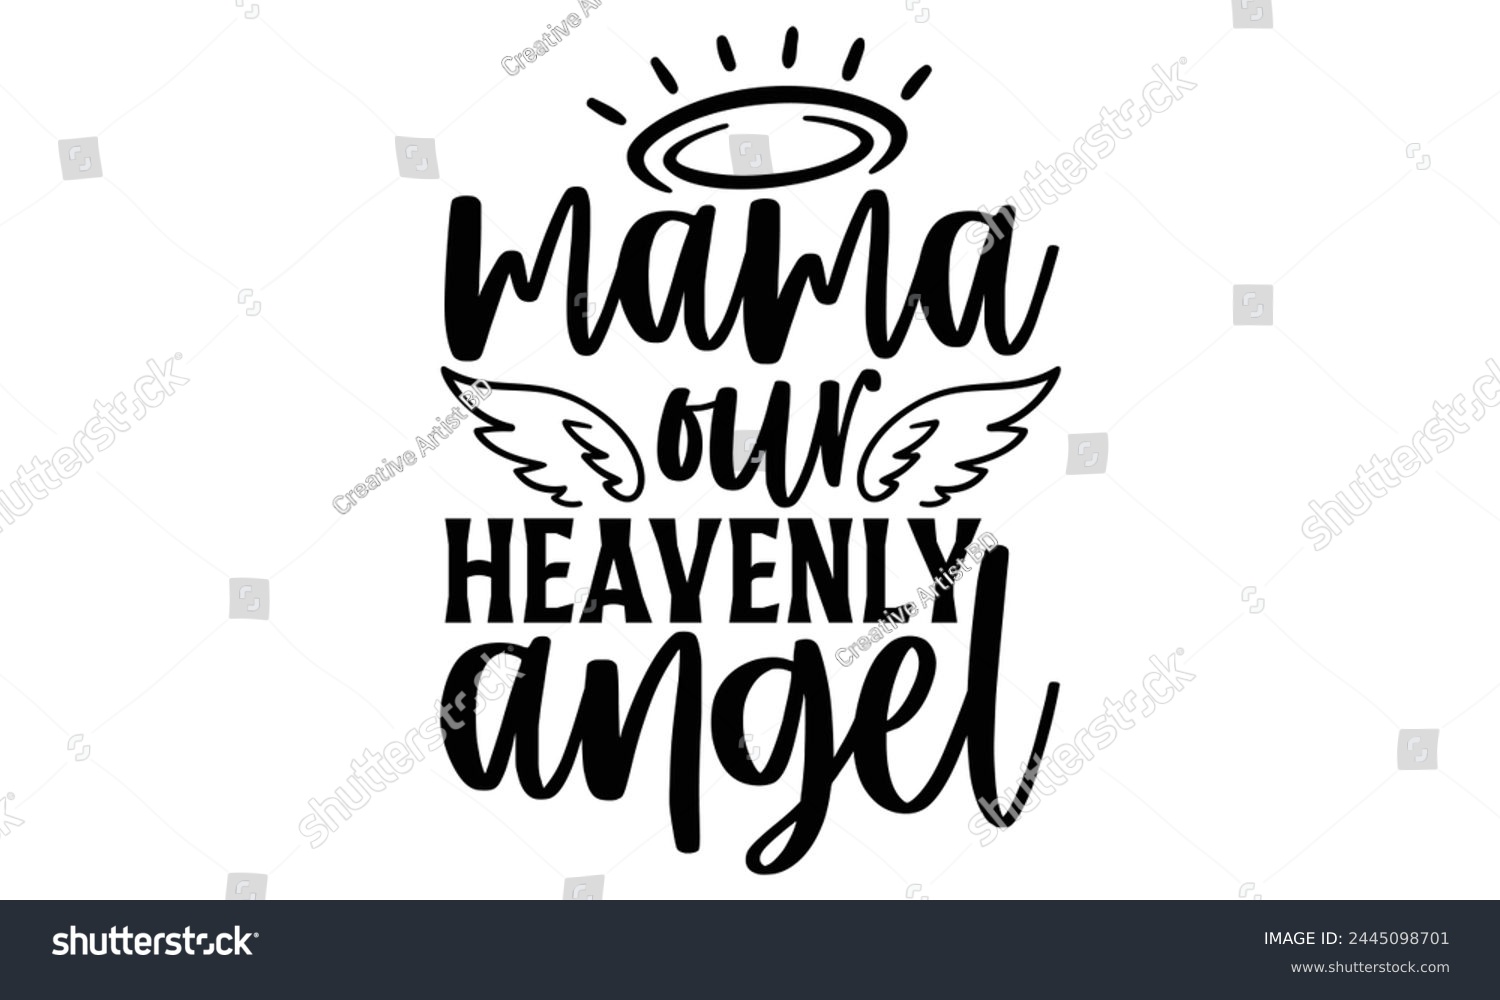 SVG of Mama Our Heavenly Angel - Memorial T Shirt Design, Modern calligraphy, Cutting and Silhouette, for prints on bags, cups, card, posters. svg